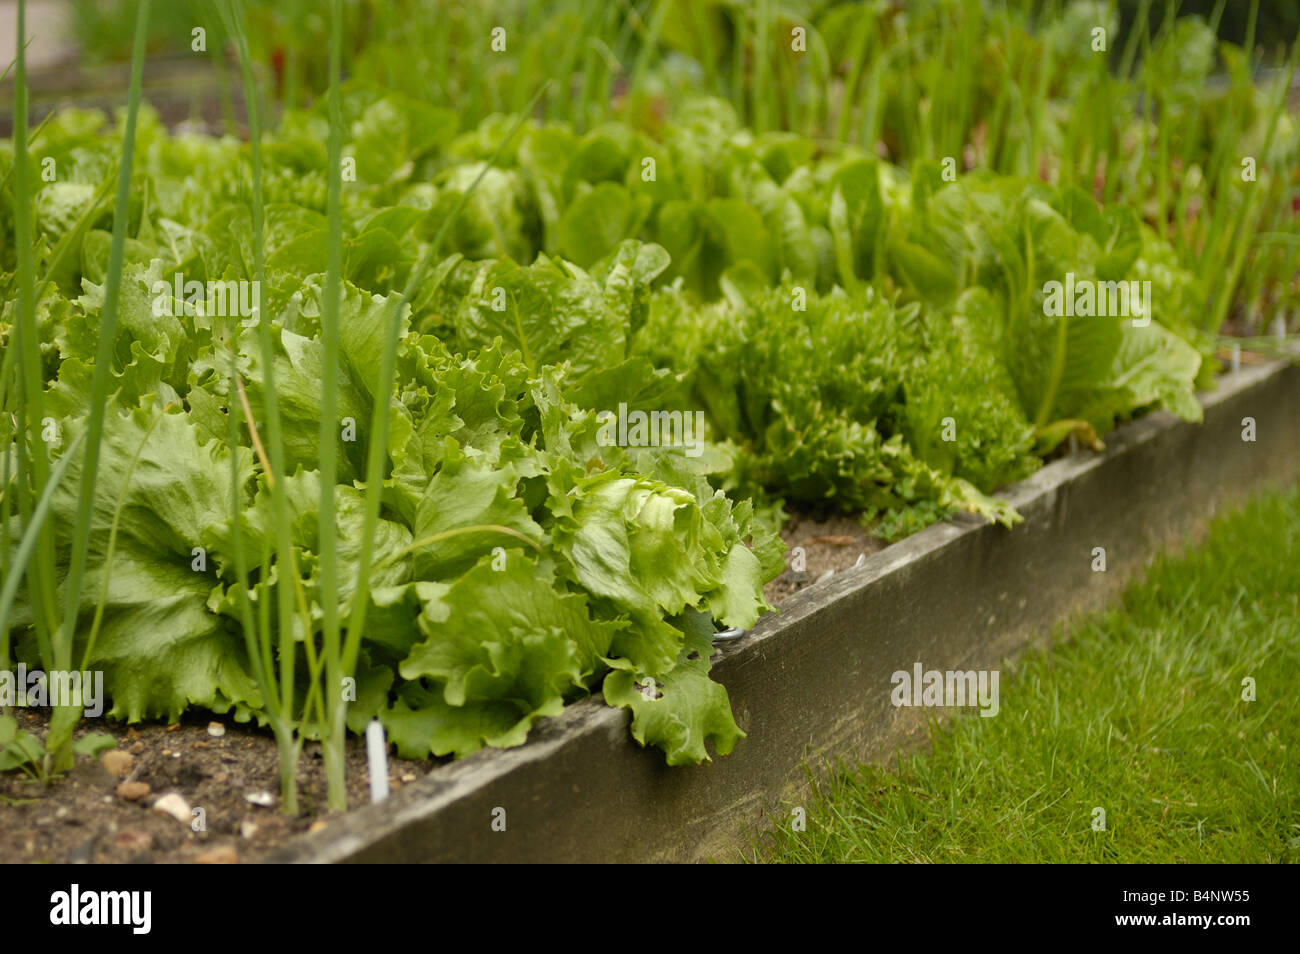 Salad crops growing in raised beds Stock Photo